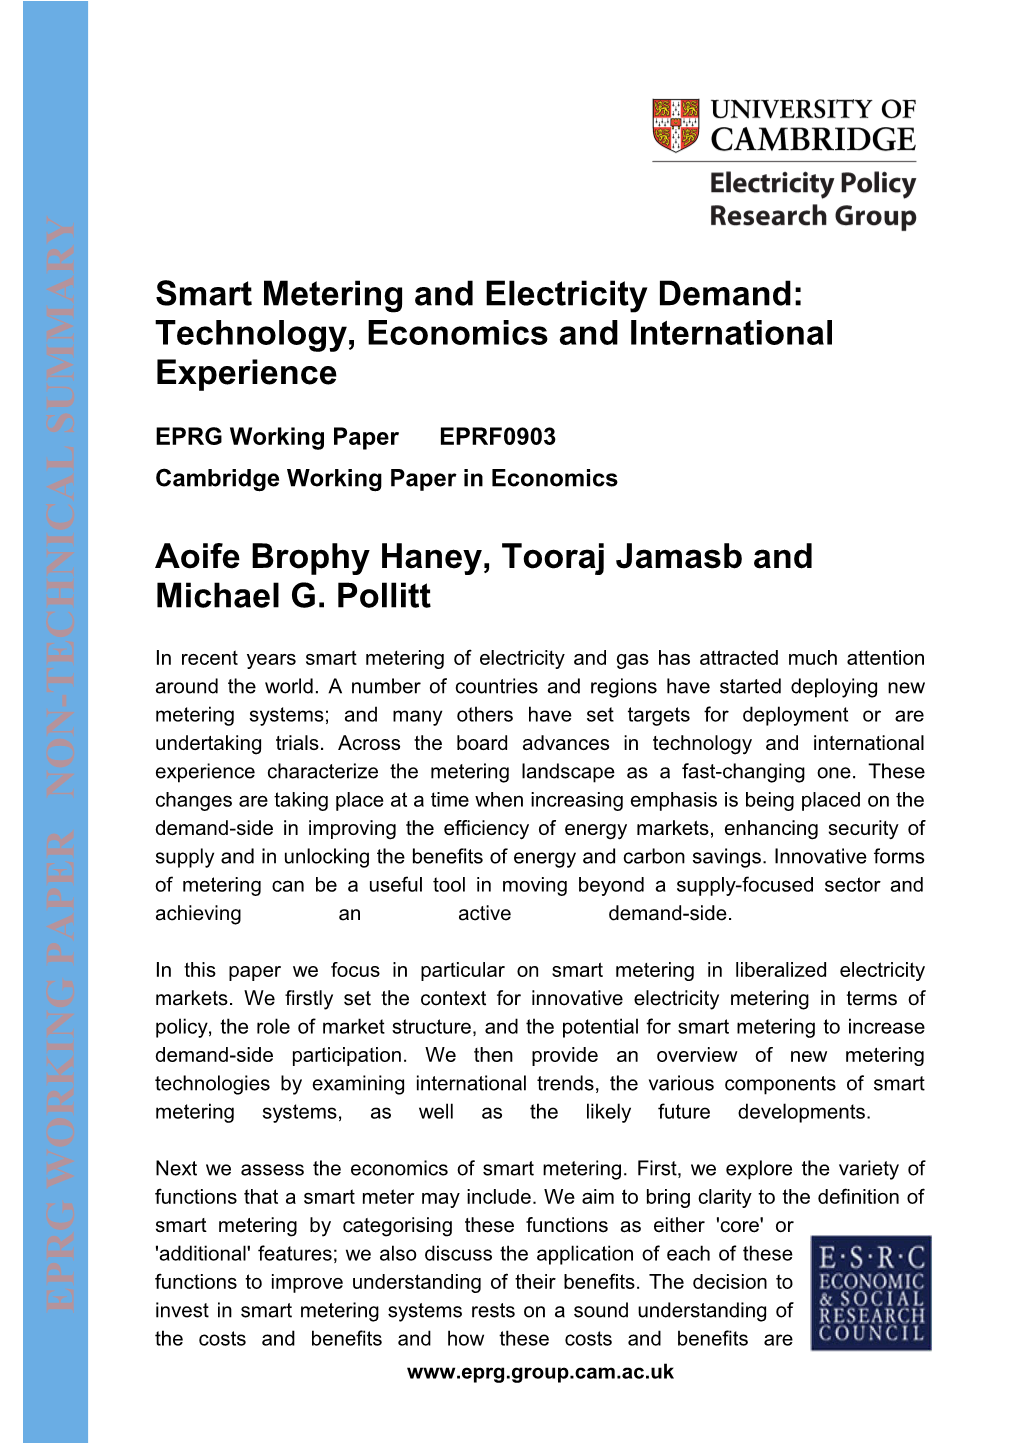 Smart Metering and Electricity Demand: Technology, Economics and International Experience